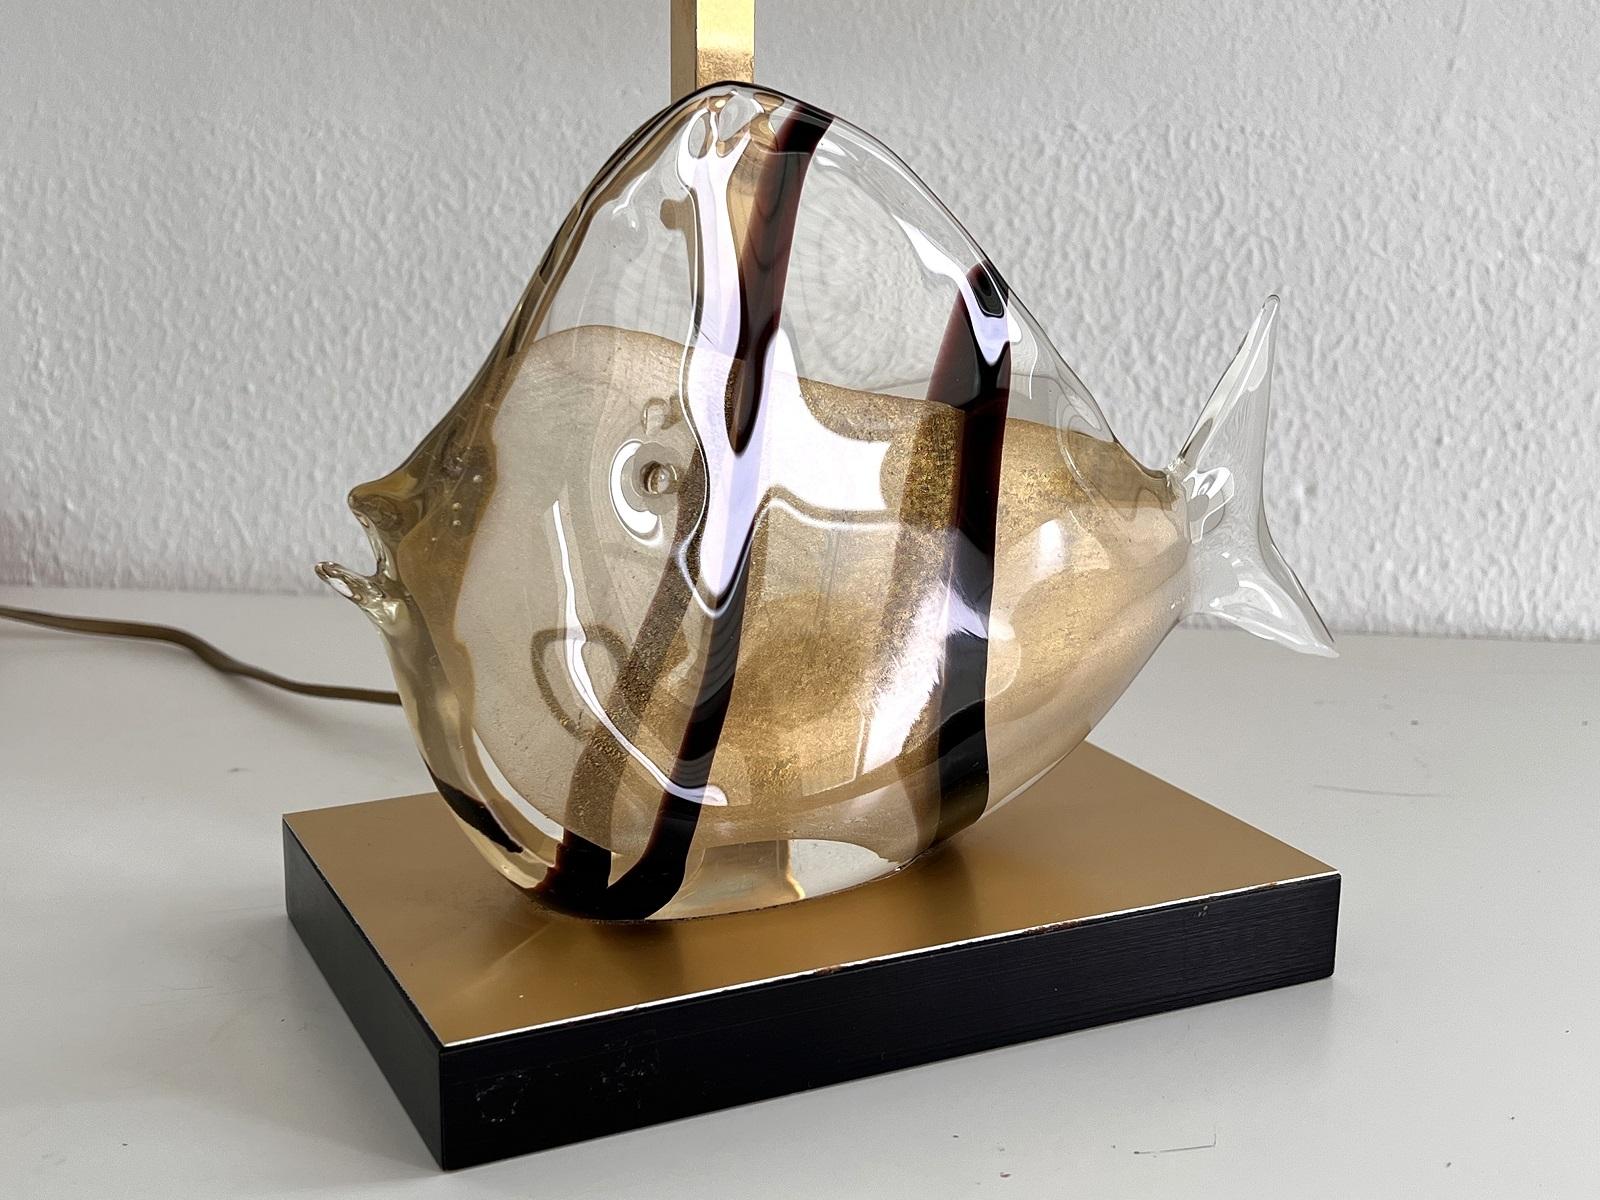 Italian Midcentury Murano Fish Glass and Brass Table Lamp, 1970s For Sale 8